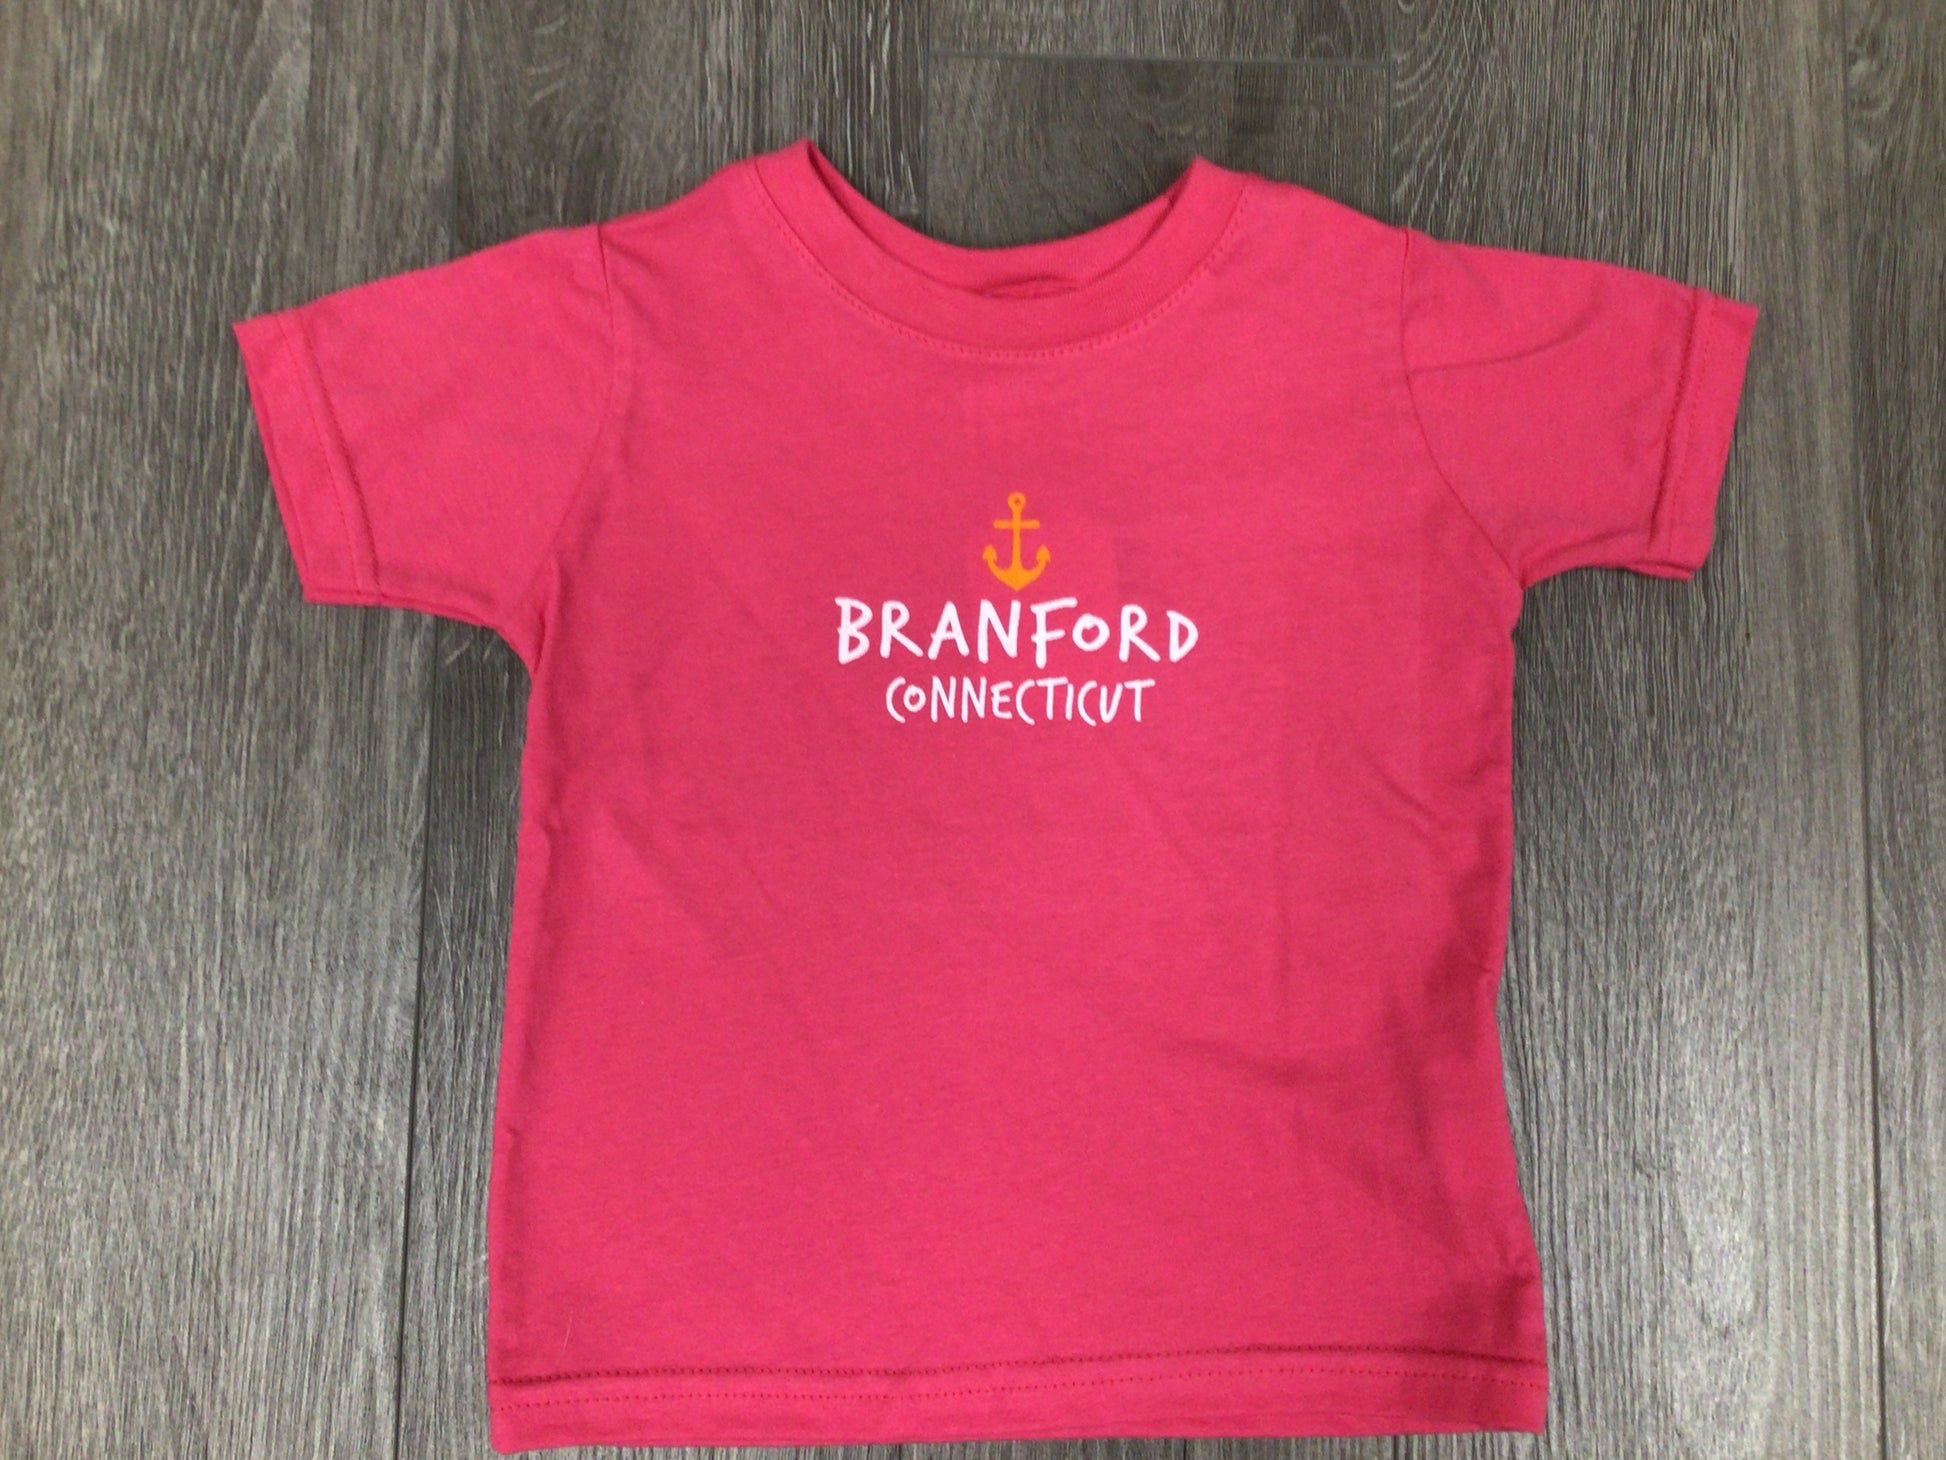 Branford Connecticut toddler t-shirts in hot pink. Sizes available for 6 months, 12 months, 18 months, 2T, 3T, and 4T.